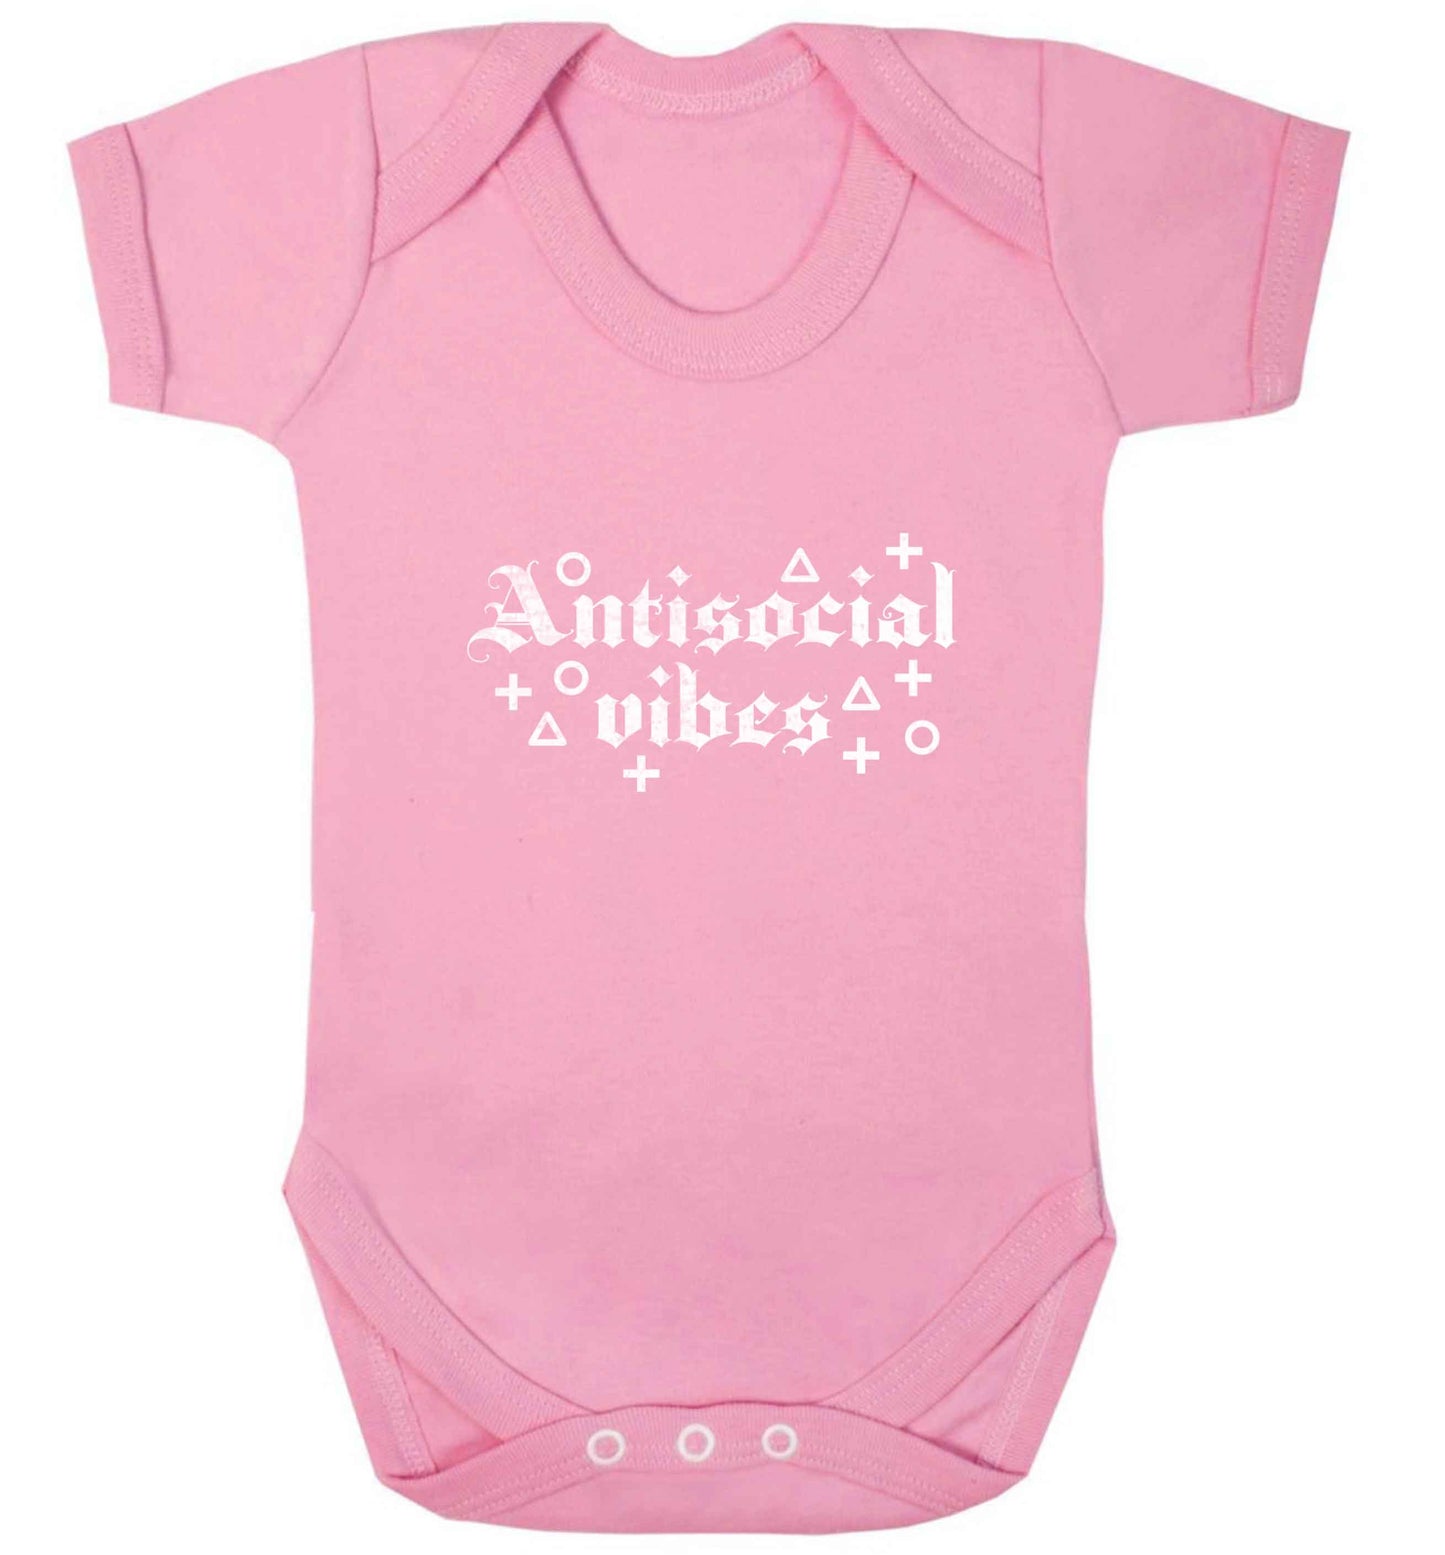 Antisocial vibes baby vest pale pink 18-24 months